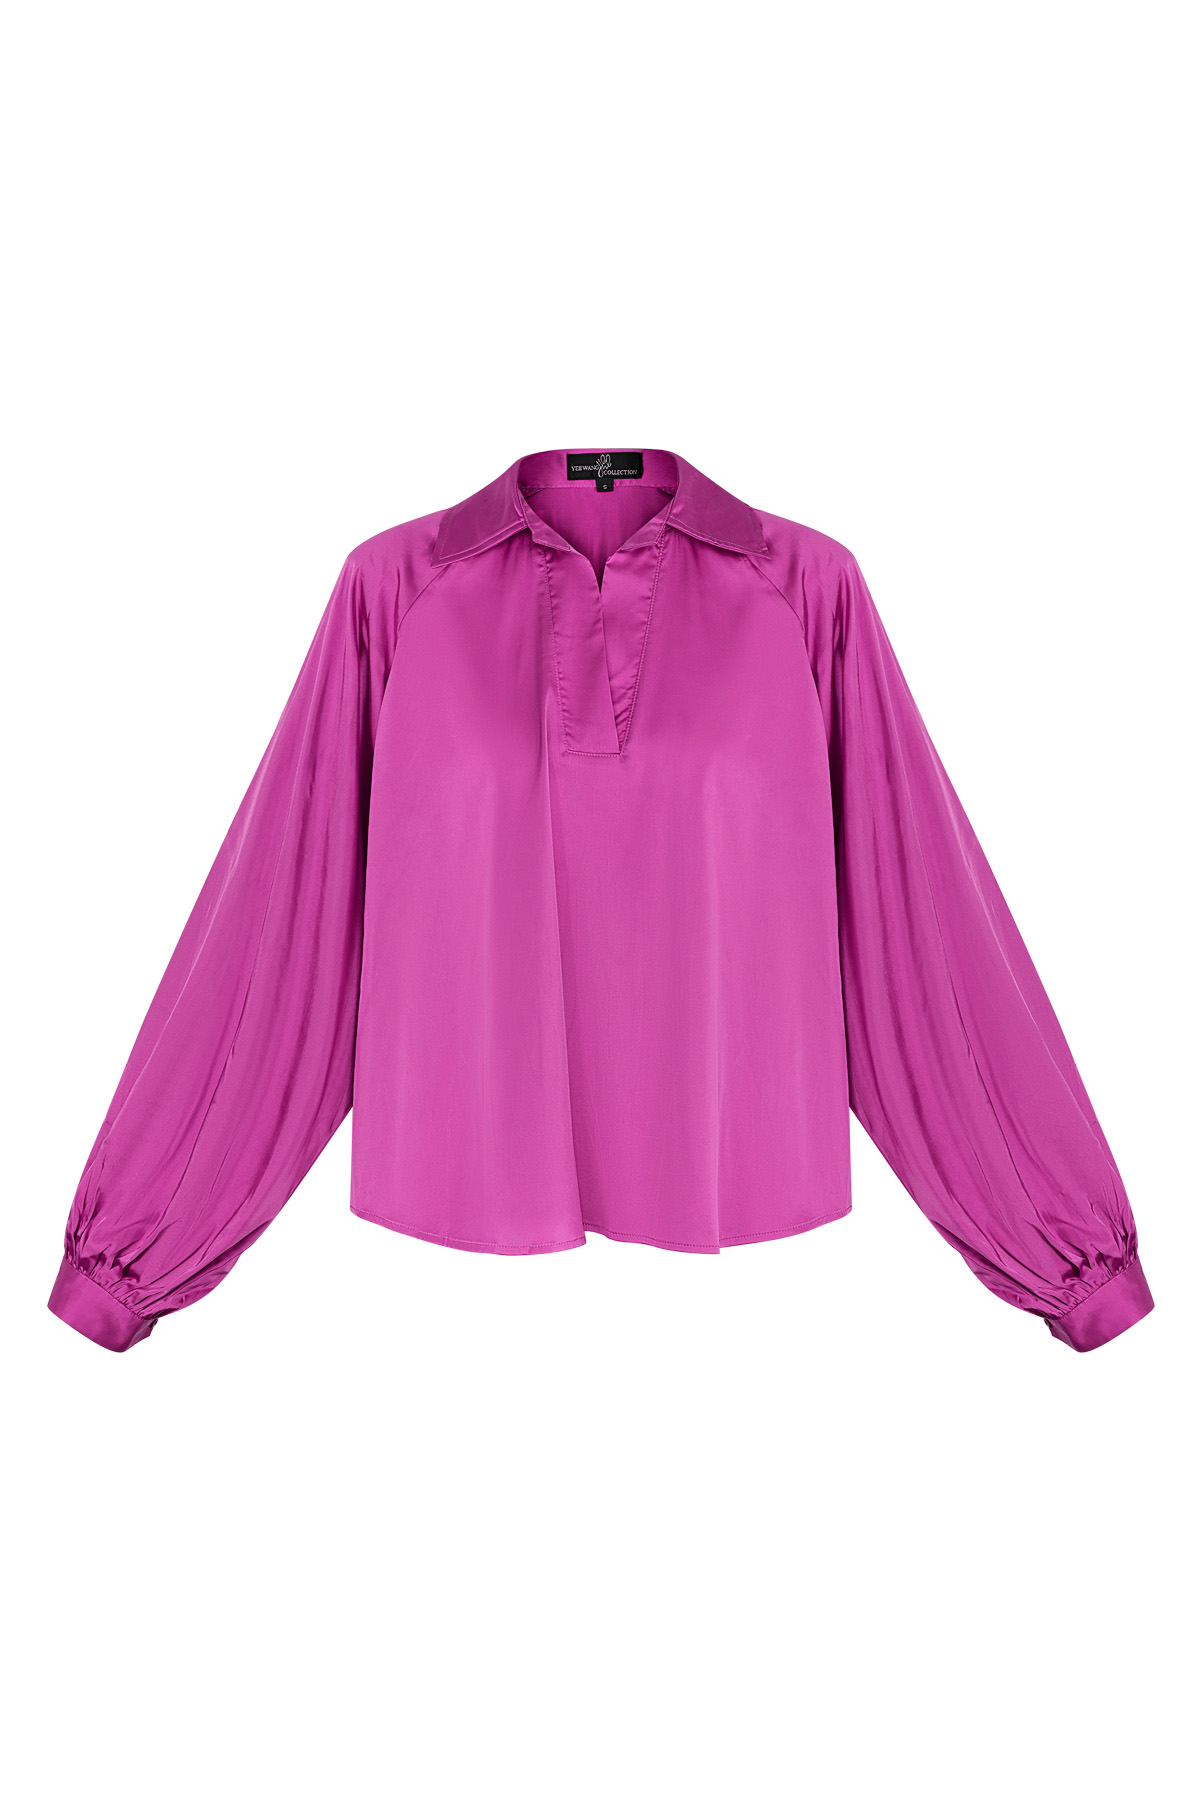 Blouse puffed sleeve pink h5 